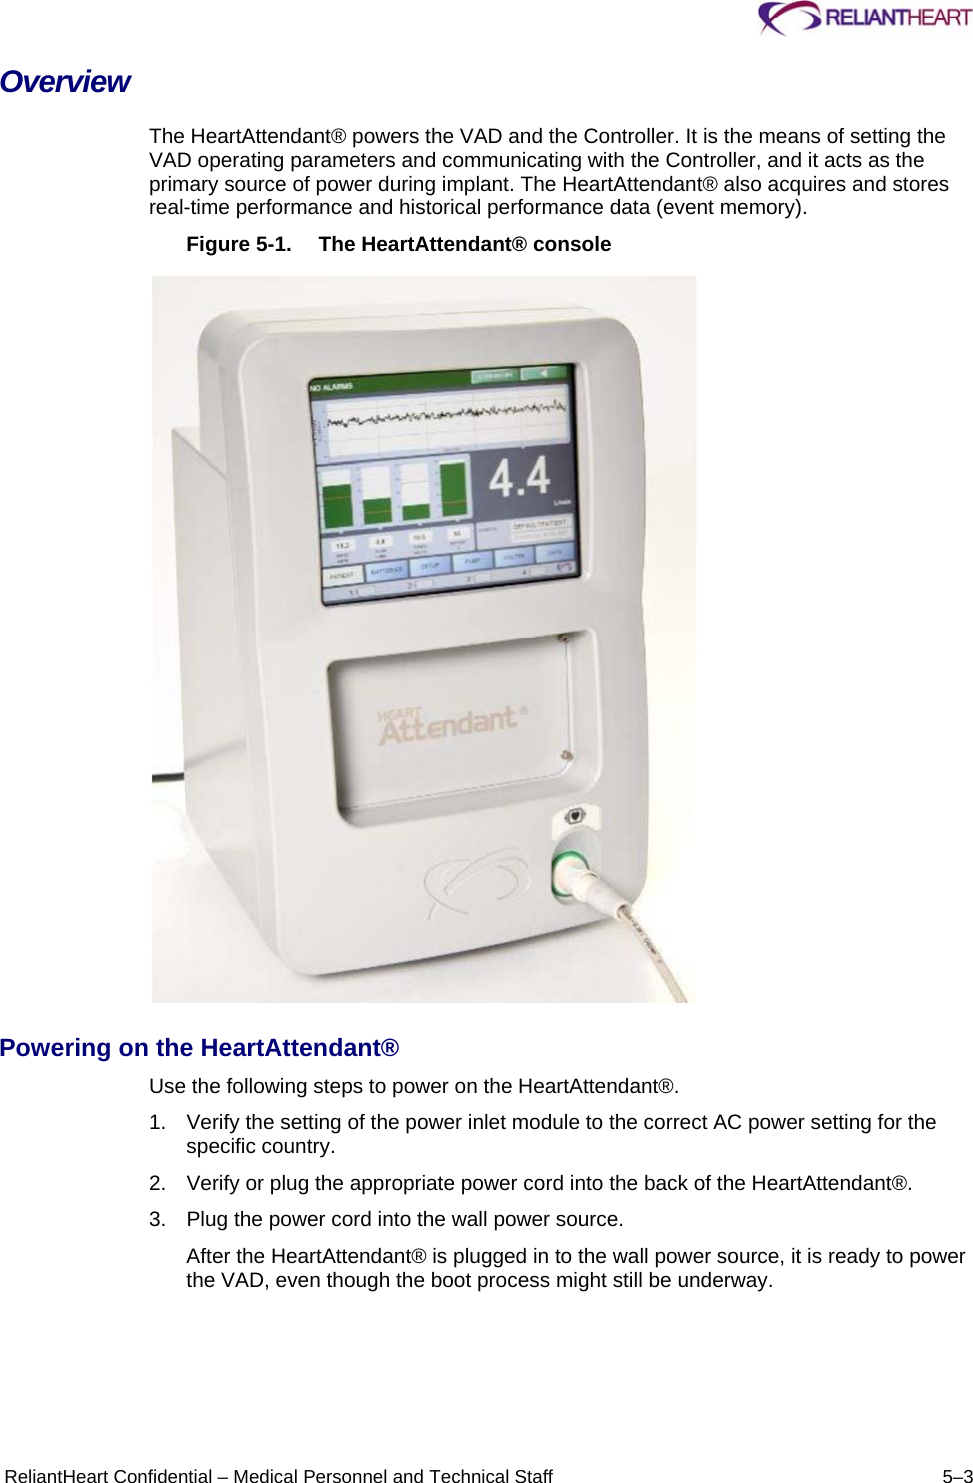      ReliantHeart Confidential – Medical Personnel and Technical Staff  5–3 Overview The HeartAttendant® powers the VAD and the Controller. It is the means of setting the VAD operating parameters and communicating with the Controller, and it acts as the primary source of power during implant. The HeartAttendant® also acquires and stores real-time performance and historical performance data (event memory).  Figure 5-1.  The HeartAttendant® console    Powering on the HeartAttendant®  Use the following steps to power on the HeartAttendant®.  1.  Verify the setting of the power inlet module to the correct AC power setting for the specific country.  2.  Verify or plug the appropriate power cord into the back of the HeartAttendant®.  3.  Plug the power cord into the wall power source.  After the HeartAttendant® is plugged in to the wall power source, it is ready to power the VAD, even though the boot process might still be underway.  